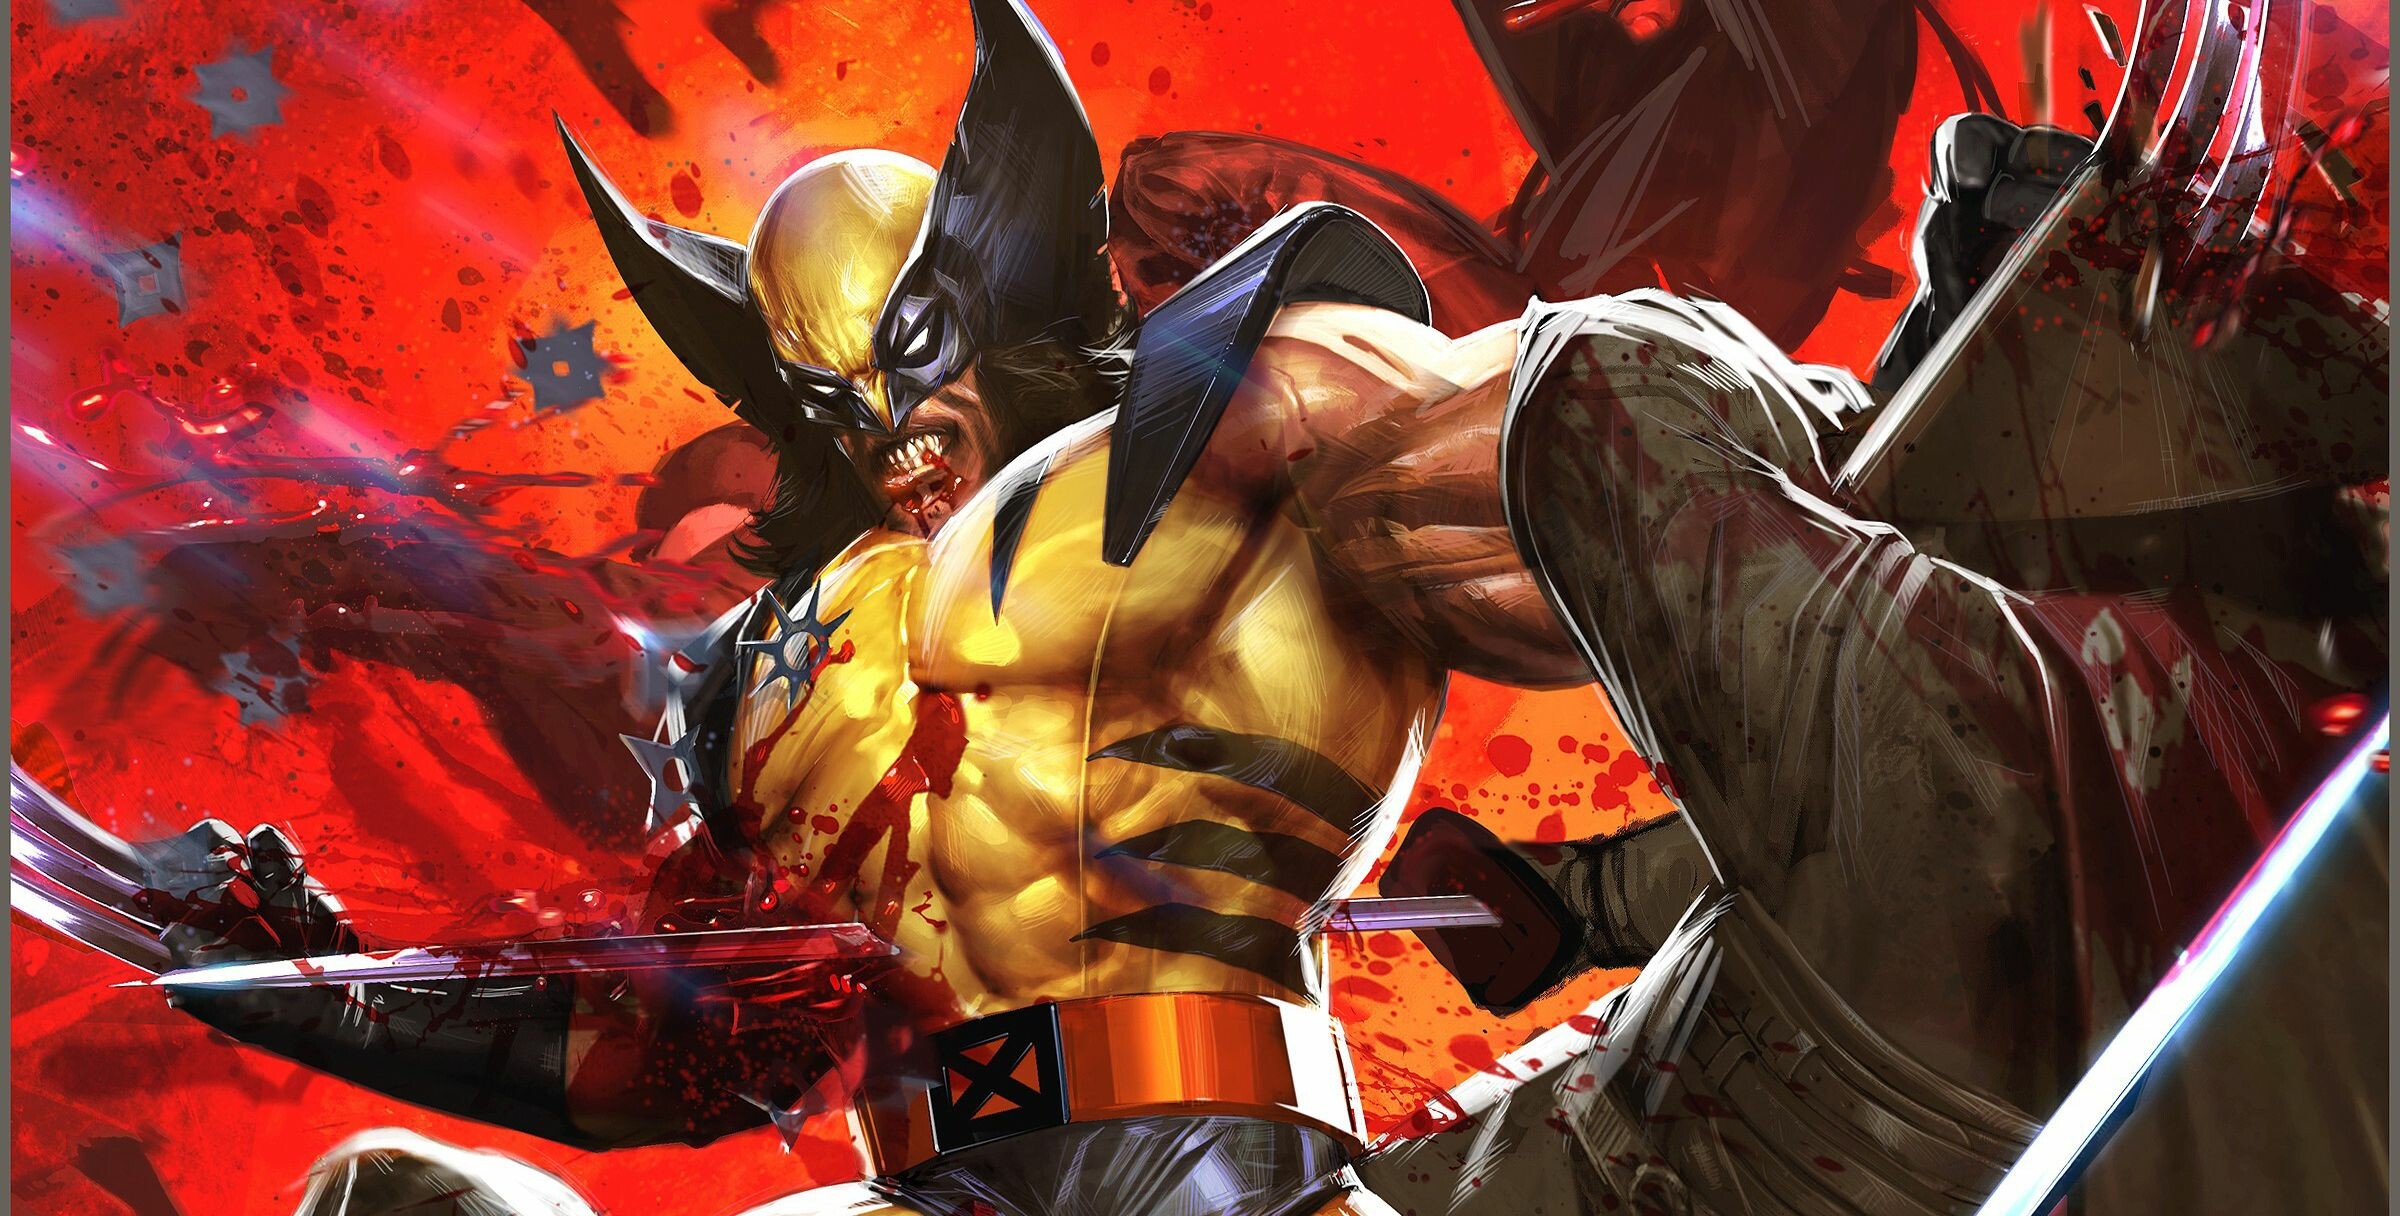 Bloody Wolverine Comic Phone Wallpaper: HD, 4K, 5K for PC and Mobile. Download free image for iPhone, Android